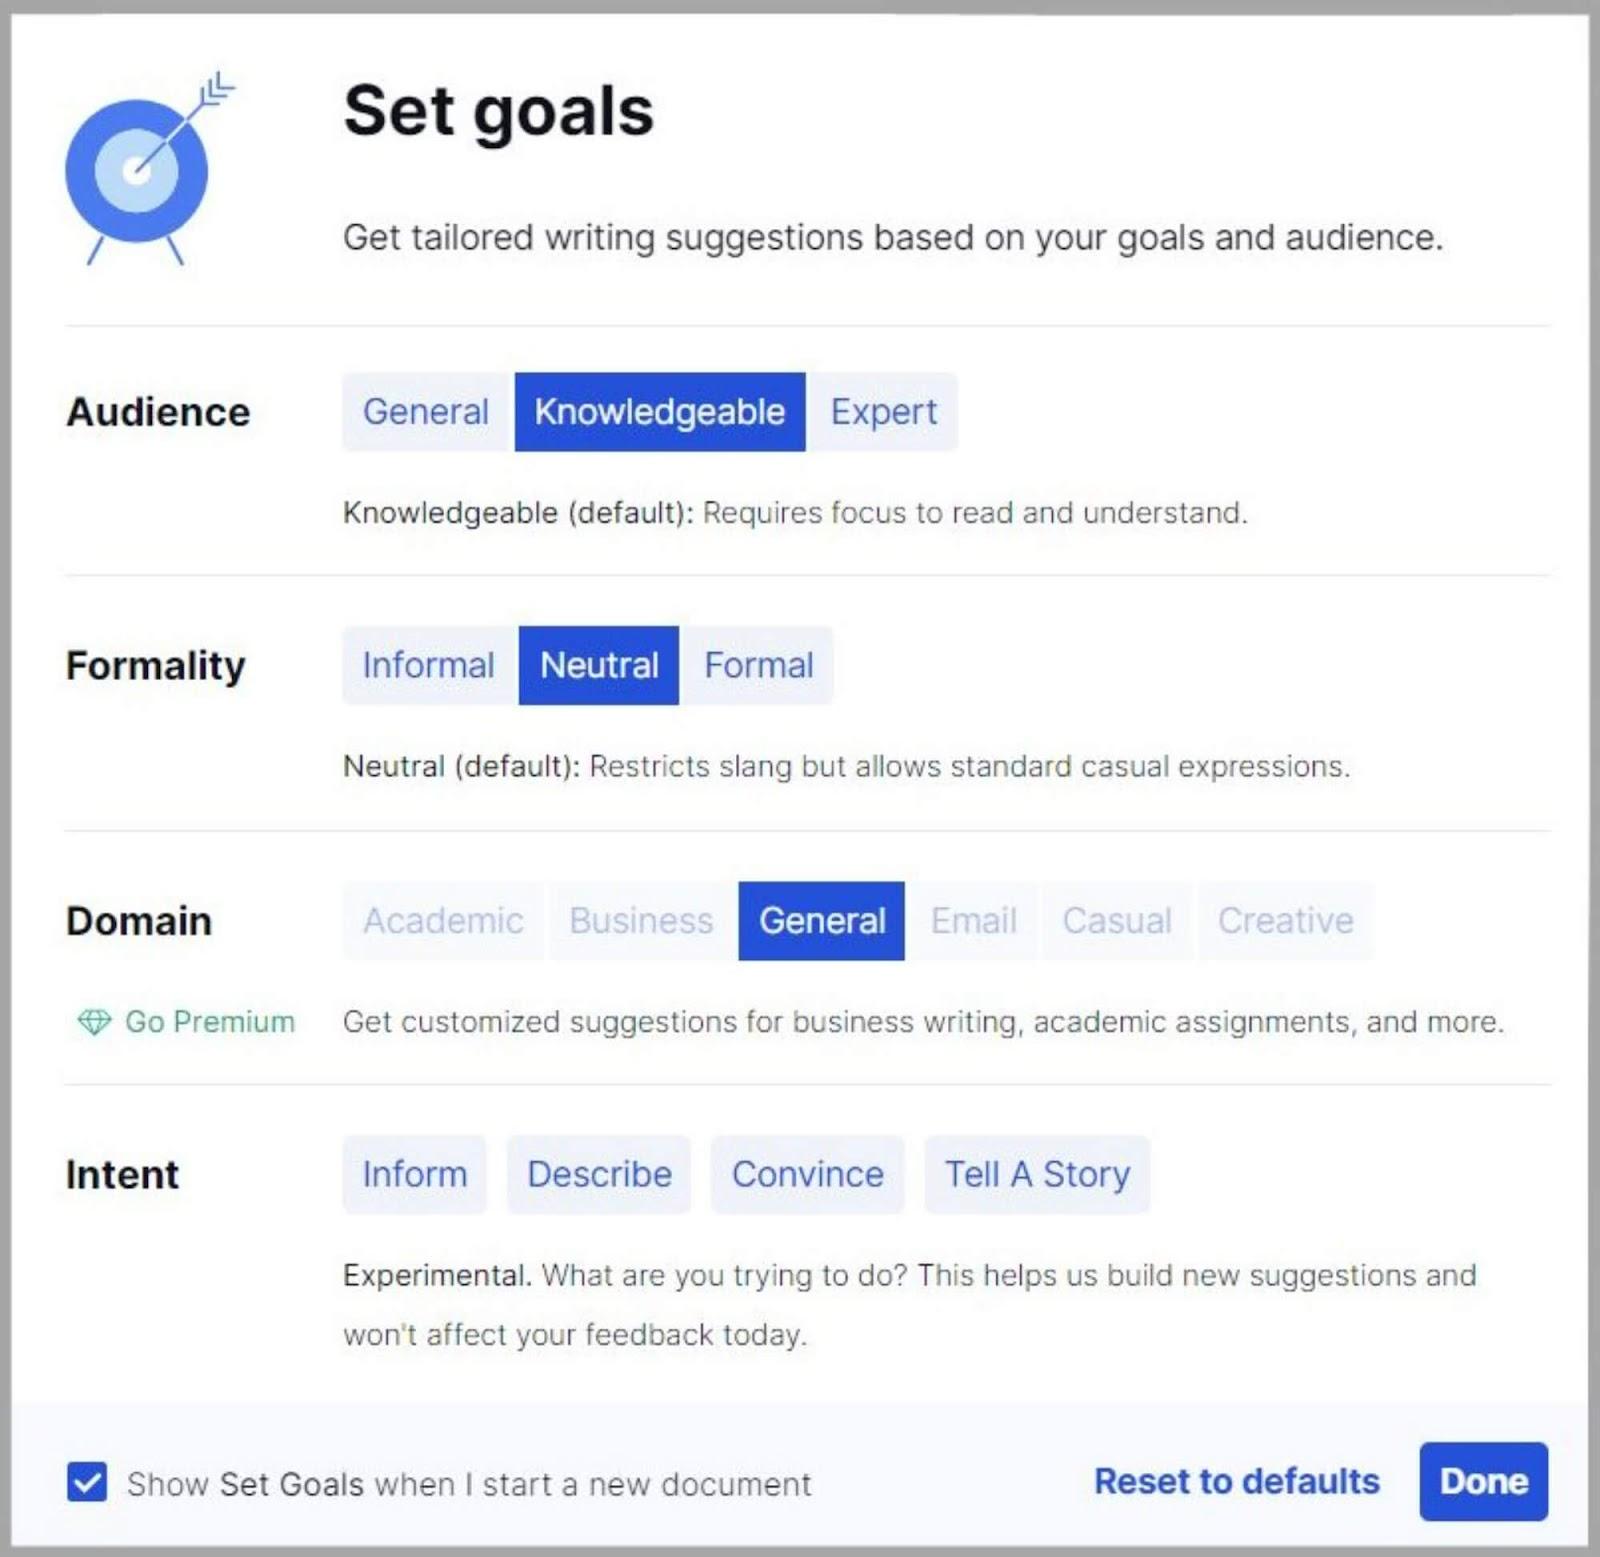 Setting content goals on Grammarly